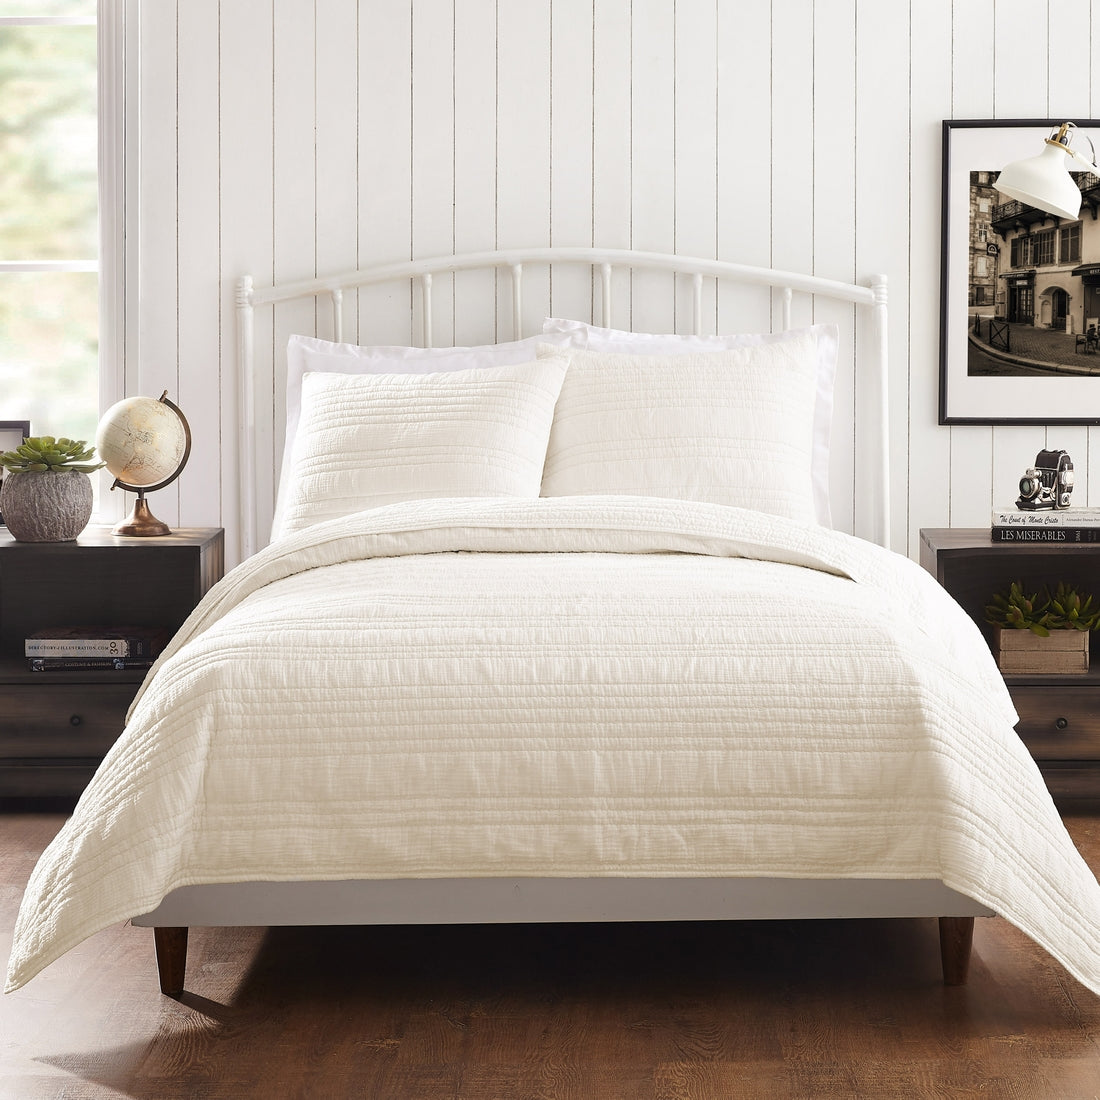 Atmosphere Quilt/Shams (Ivory) by 1977 Dry Goods | Full/Queen